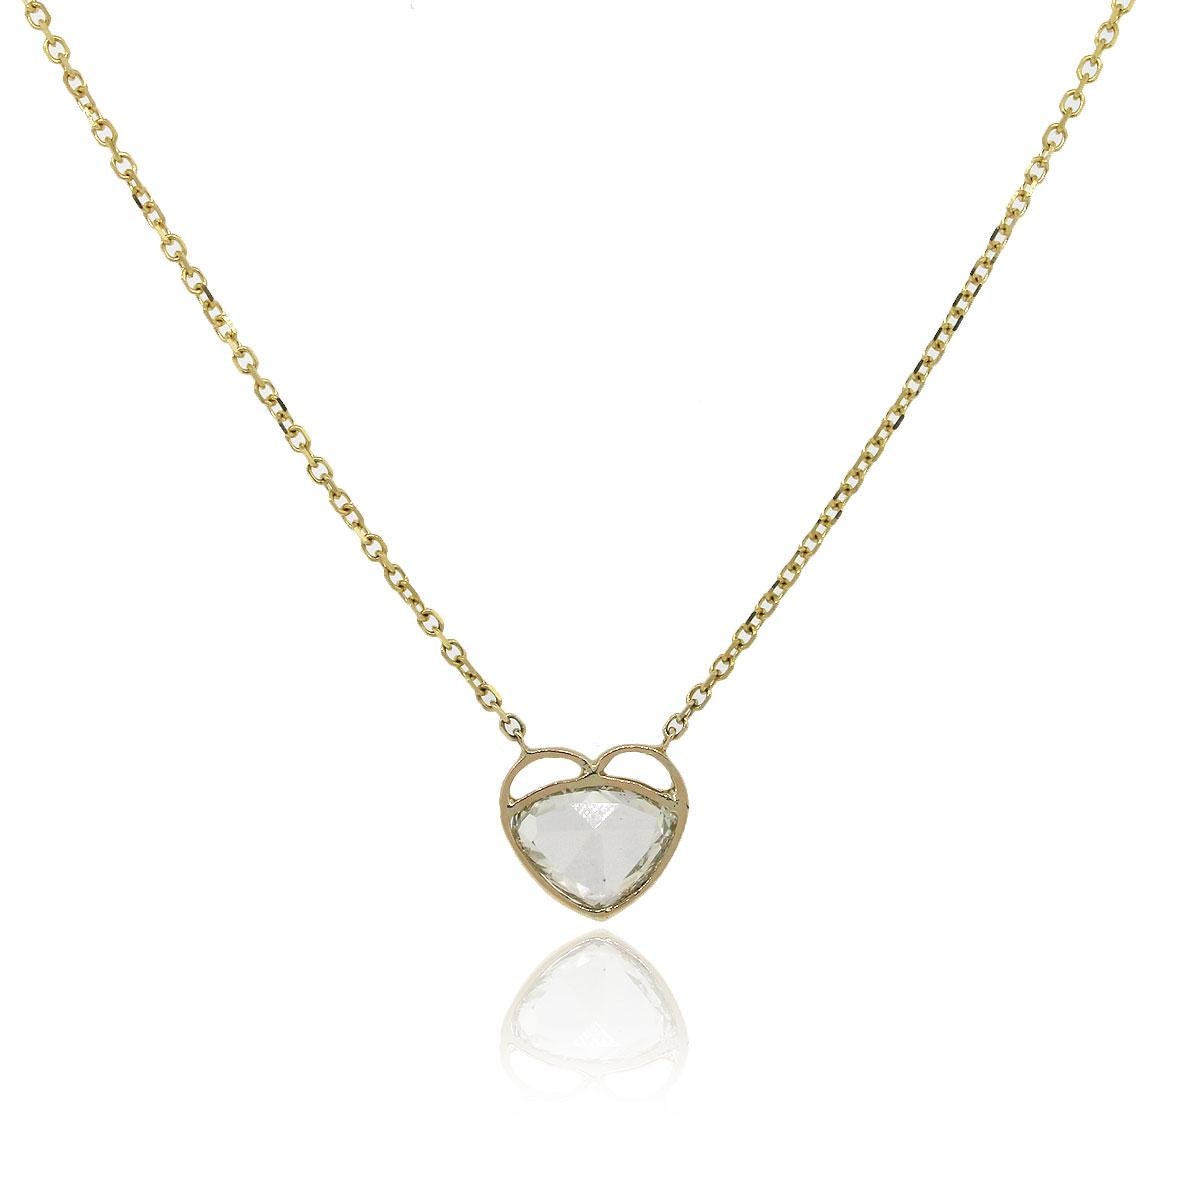 Material: 14k yellow gold
Diamond Details: GIA Certified 2.23ctw of modified heart brilliant diamond. Diamond is Light Greenish Yellow in color and SI1
GIA # 2195219729
Measurements: Necklace measures 18″
Pendant Measurements: 12.50mm x 11.60mm x